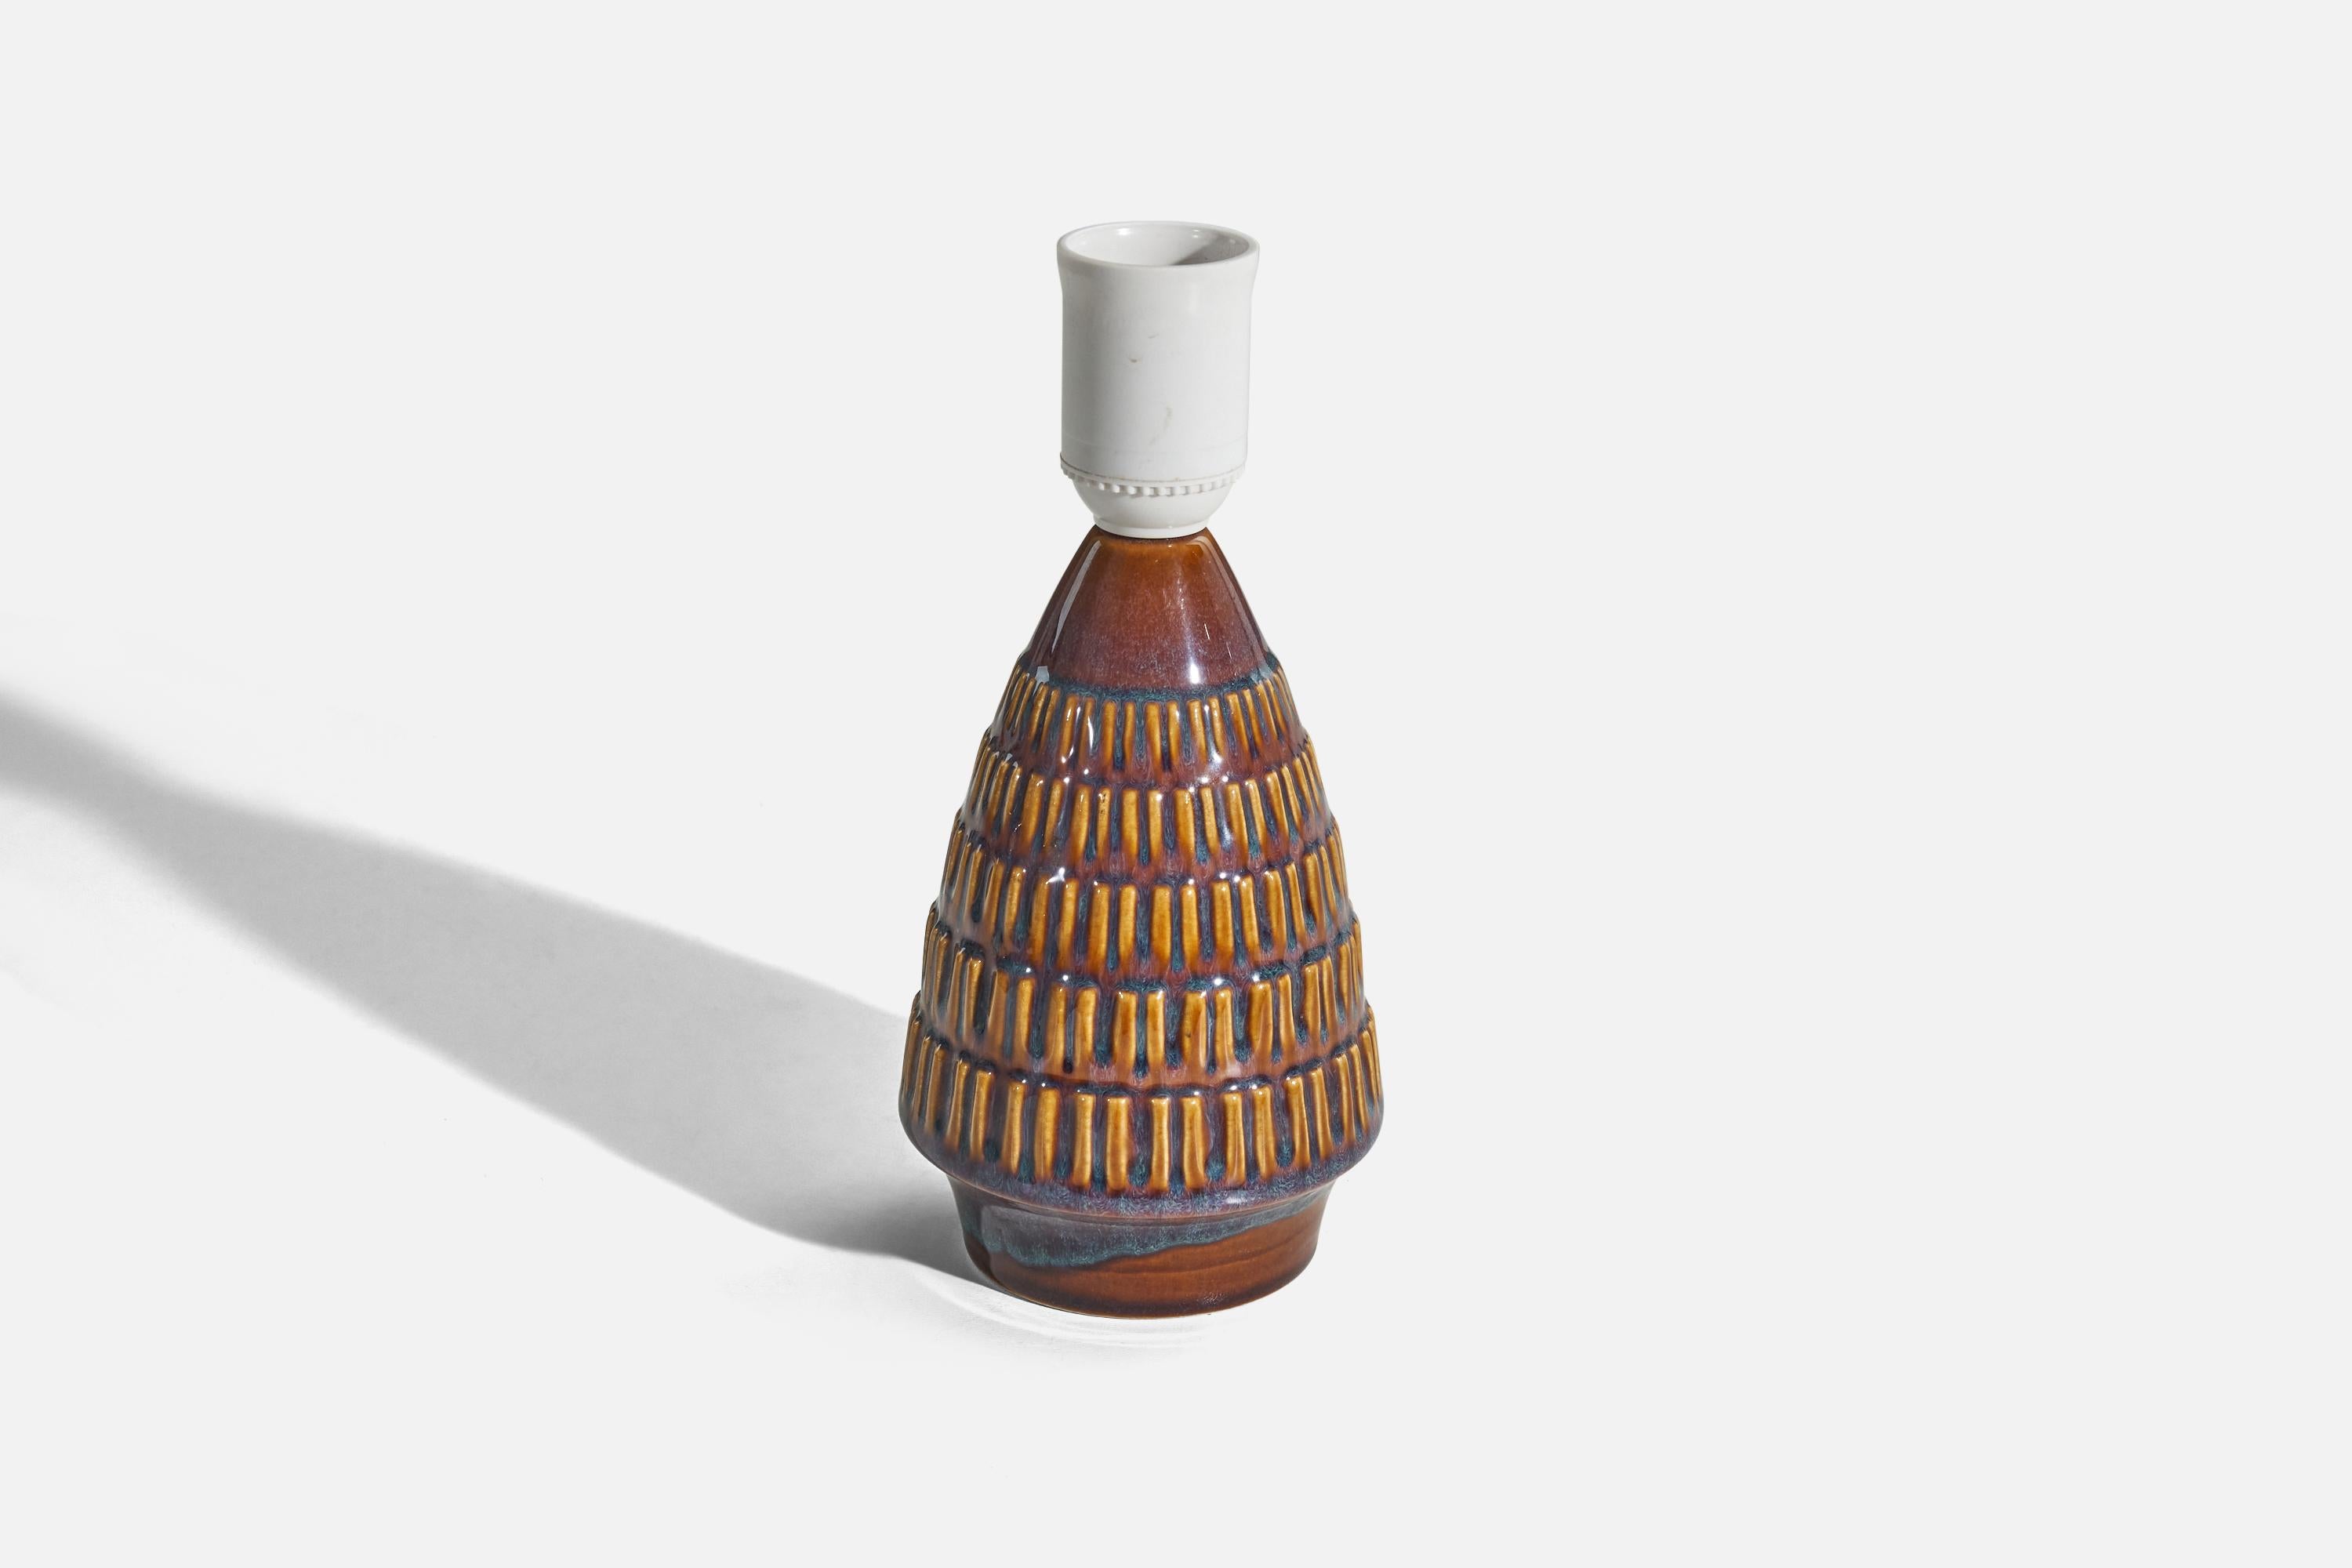 Søholm Stentøj, Table Lamp, Blue and Brown-Glazed Stoneware, Denmark, c. 1960s In Good Condition For Sale In High Point, NC